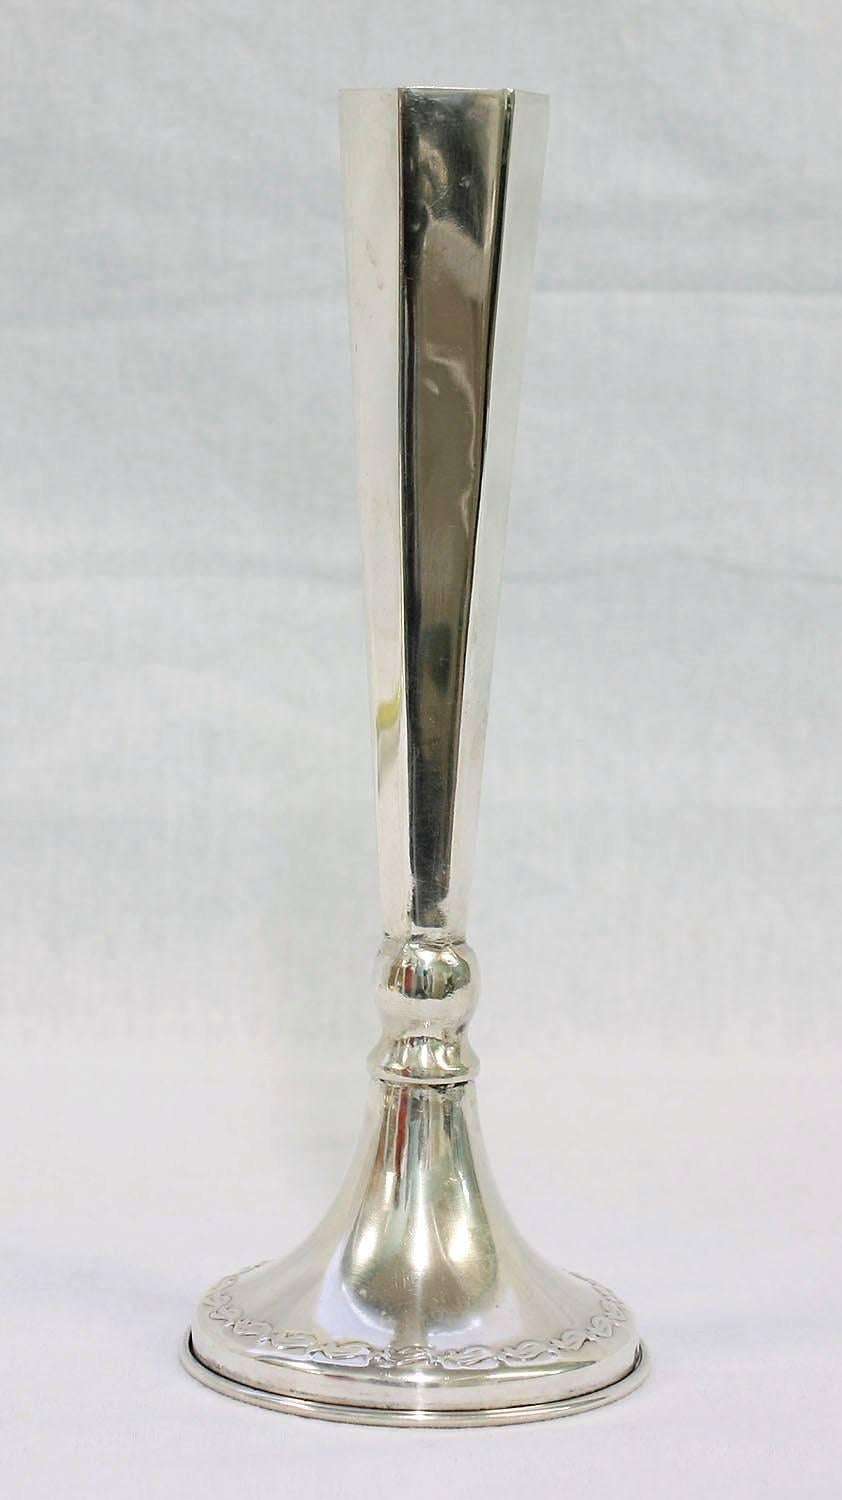 This pair of Art Deco-style candleholders is made of sterling silver and stamped .800. The candle holders have a unique shape that resembles a champagne flute and is accented with faceted details and a leafy trim around the base. This pair of candle